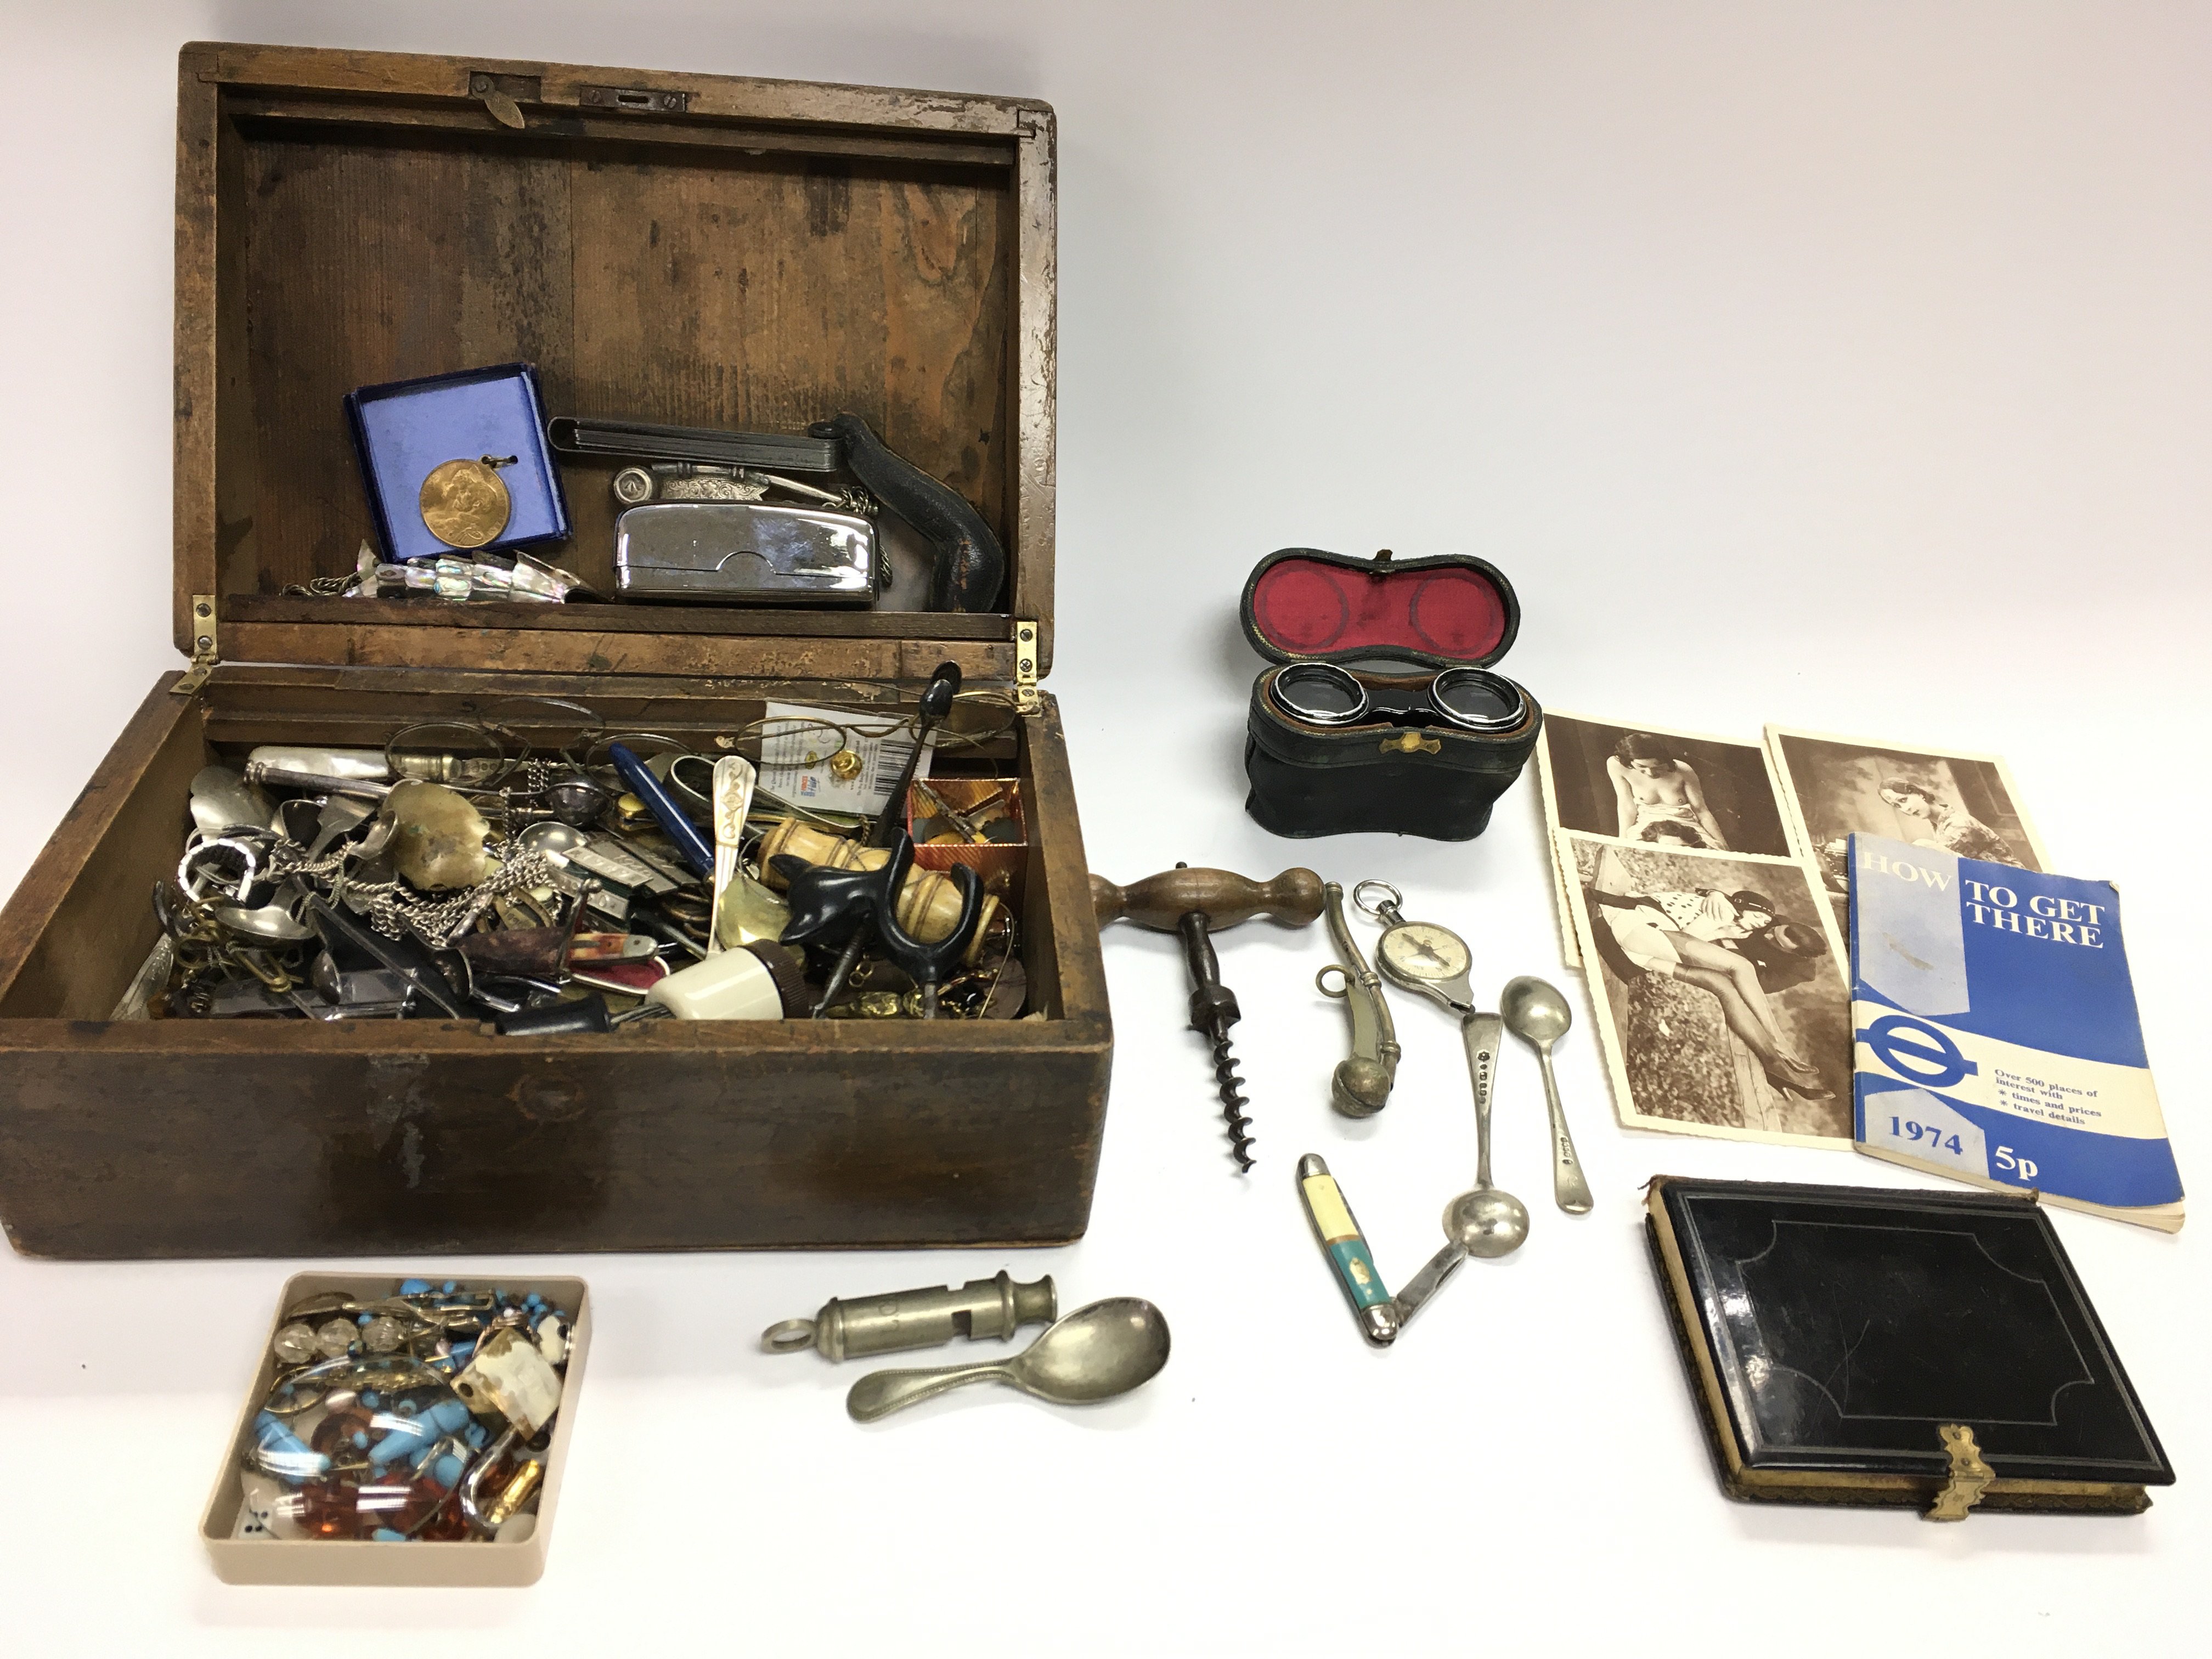 A box of interest items including whistles spoons